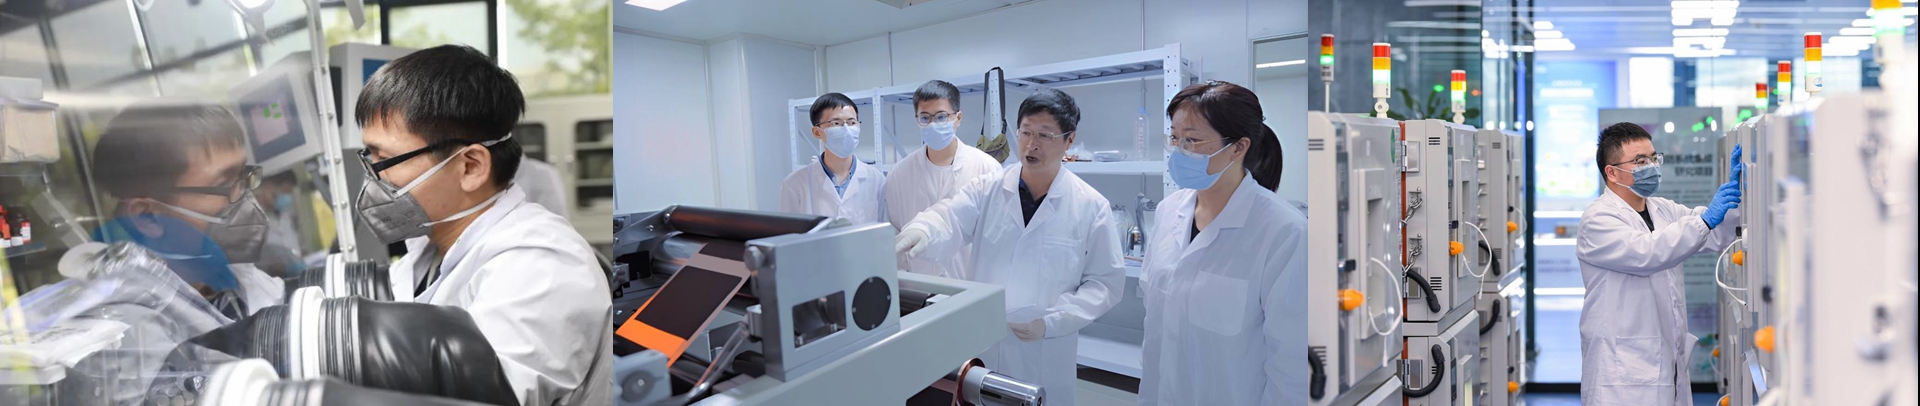 xiaowei-battery-lab-research-battery-research